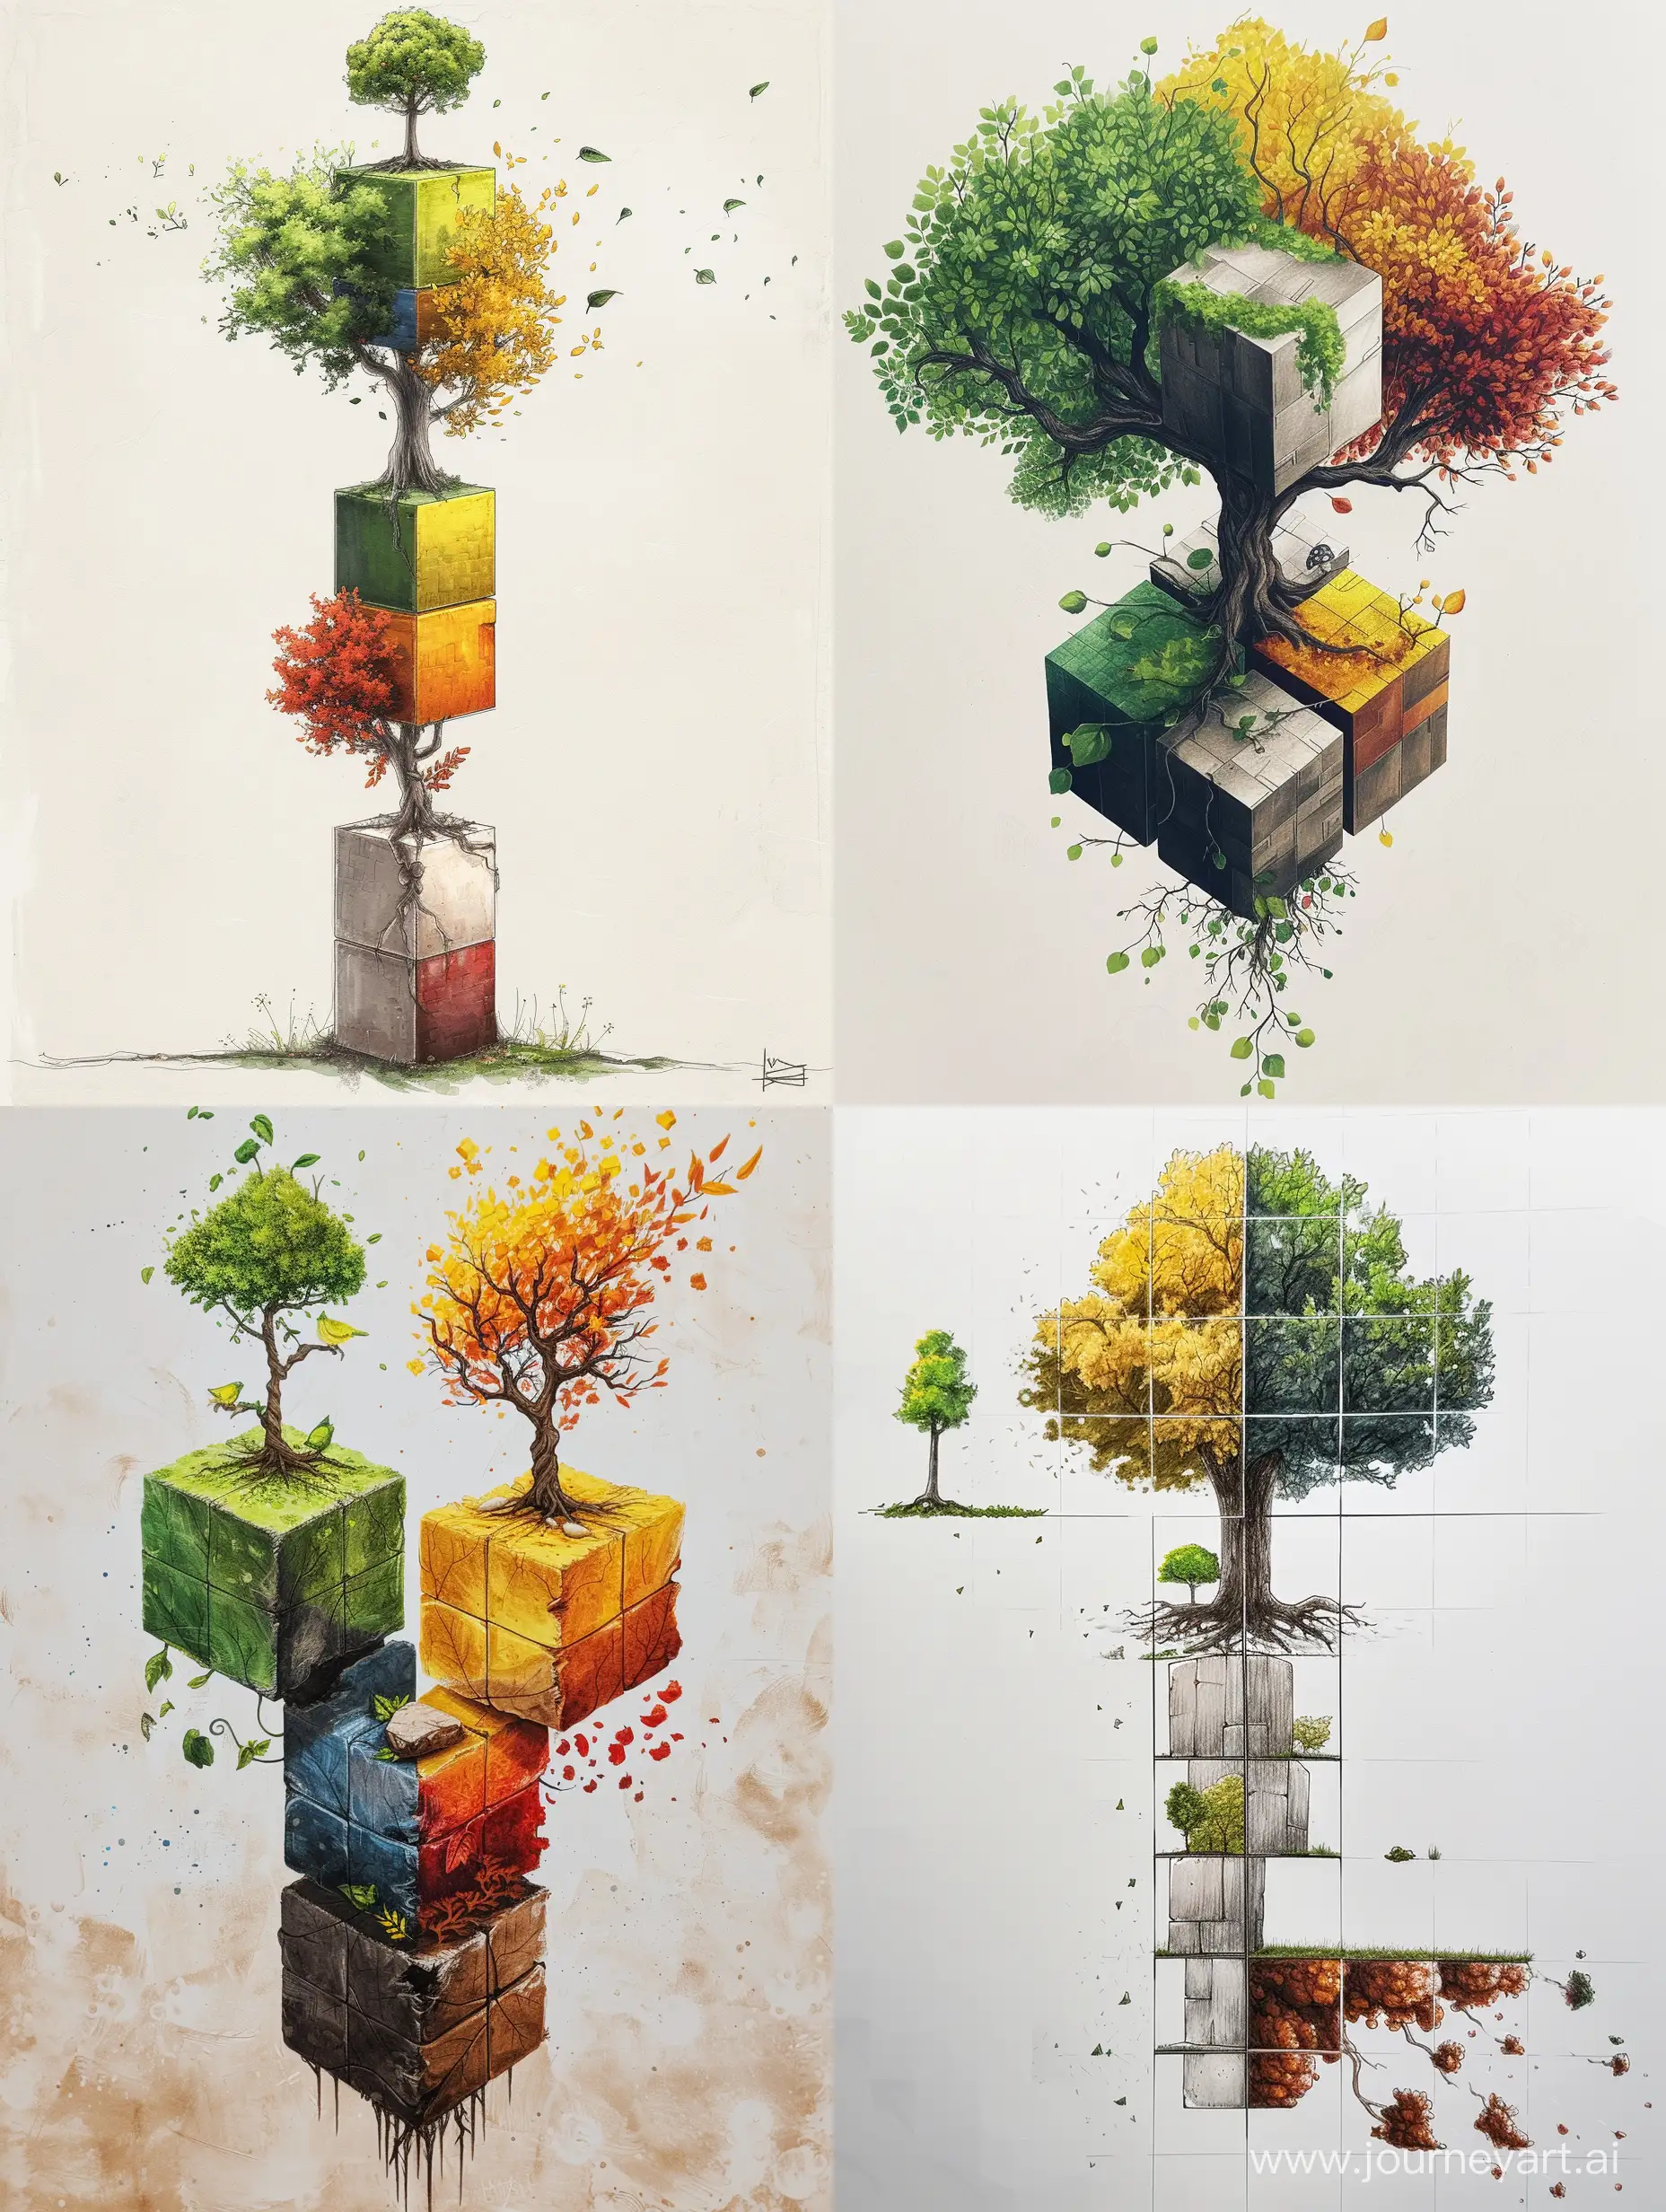 Evolution-of-a-Cubic-Tree-From-Sapling-to-Autumnal-Decay